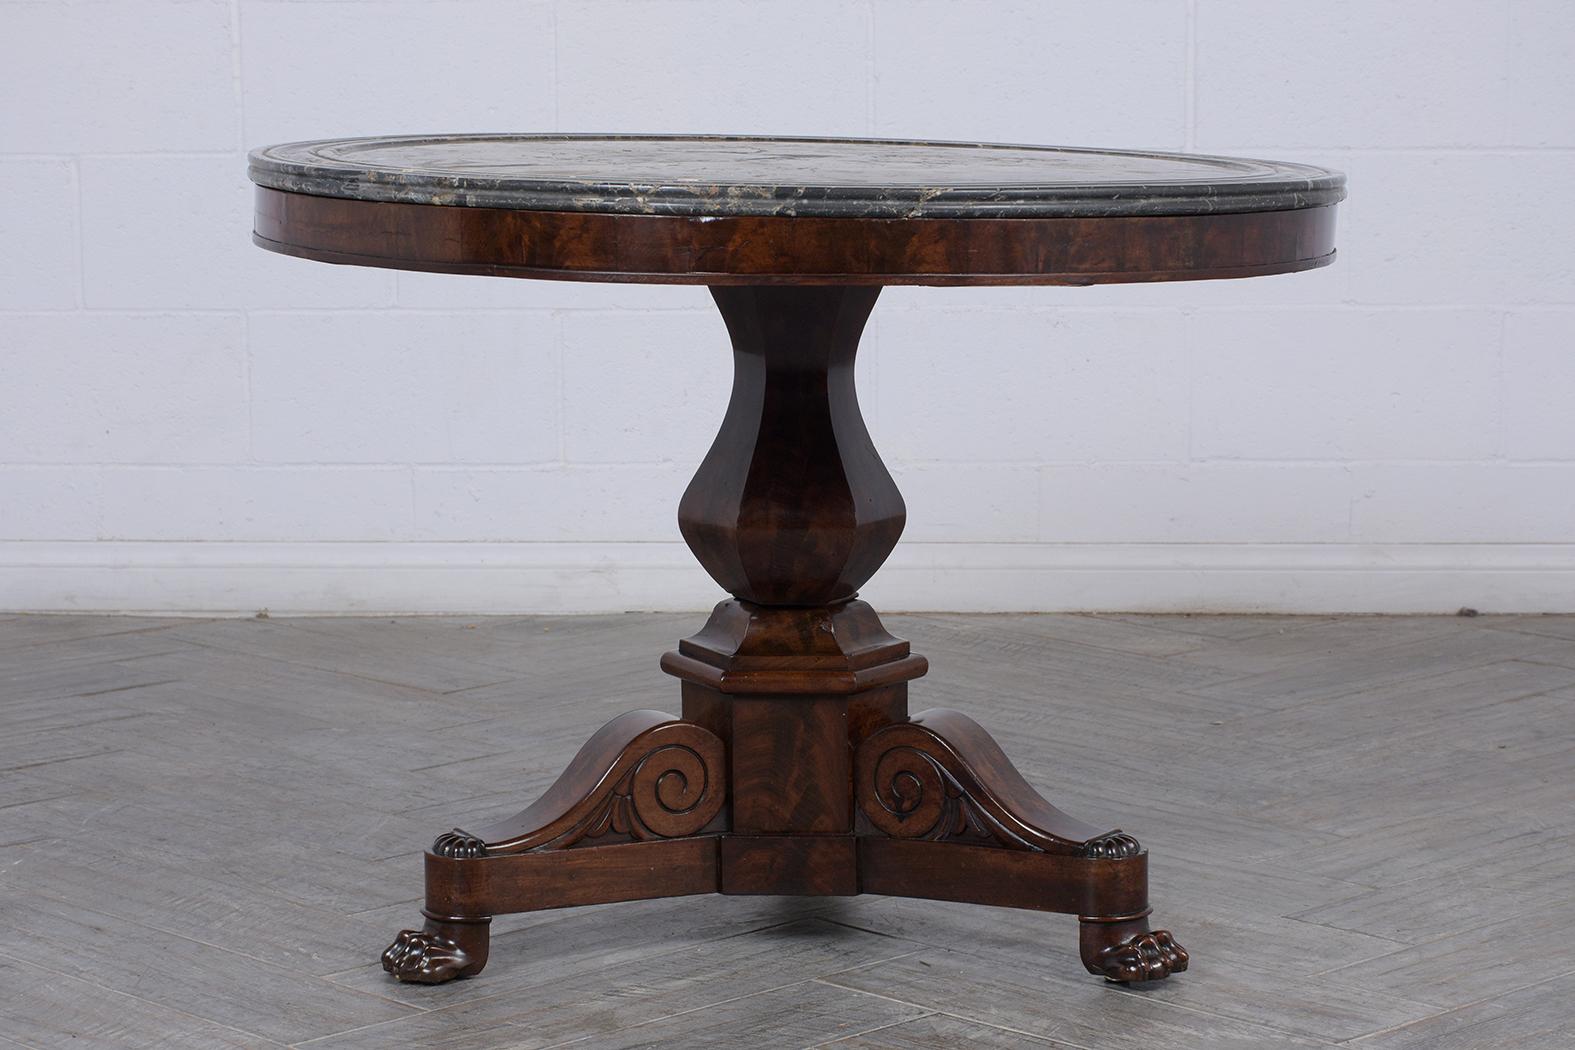 Hand-Carved Mid 19th Century French Empire Pedestal Center Table